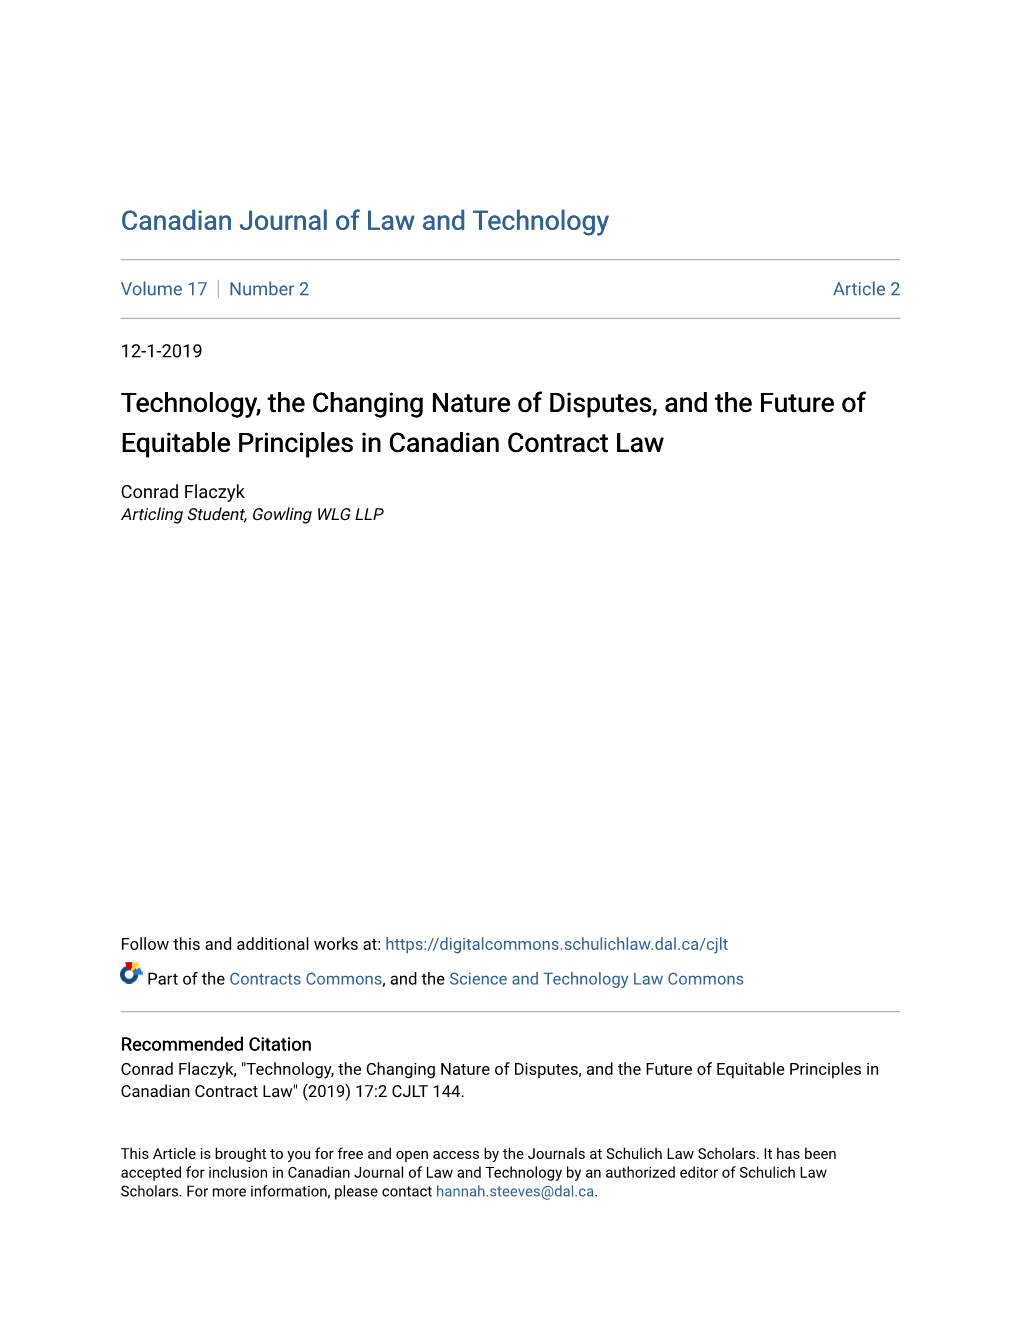 Technology, the Changing Nature of Disputes, and the Future of Equitable Principles in Canadian Contract Law